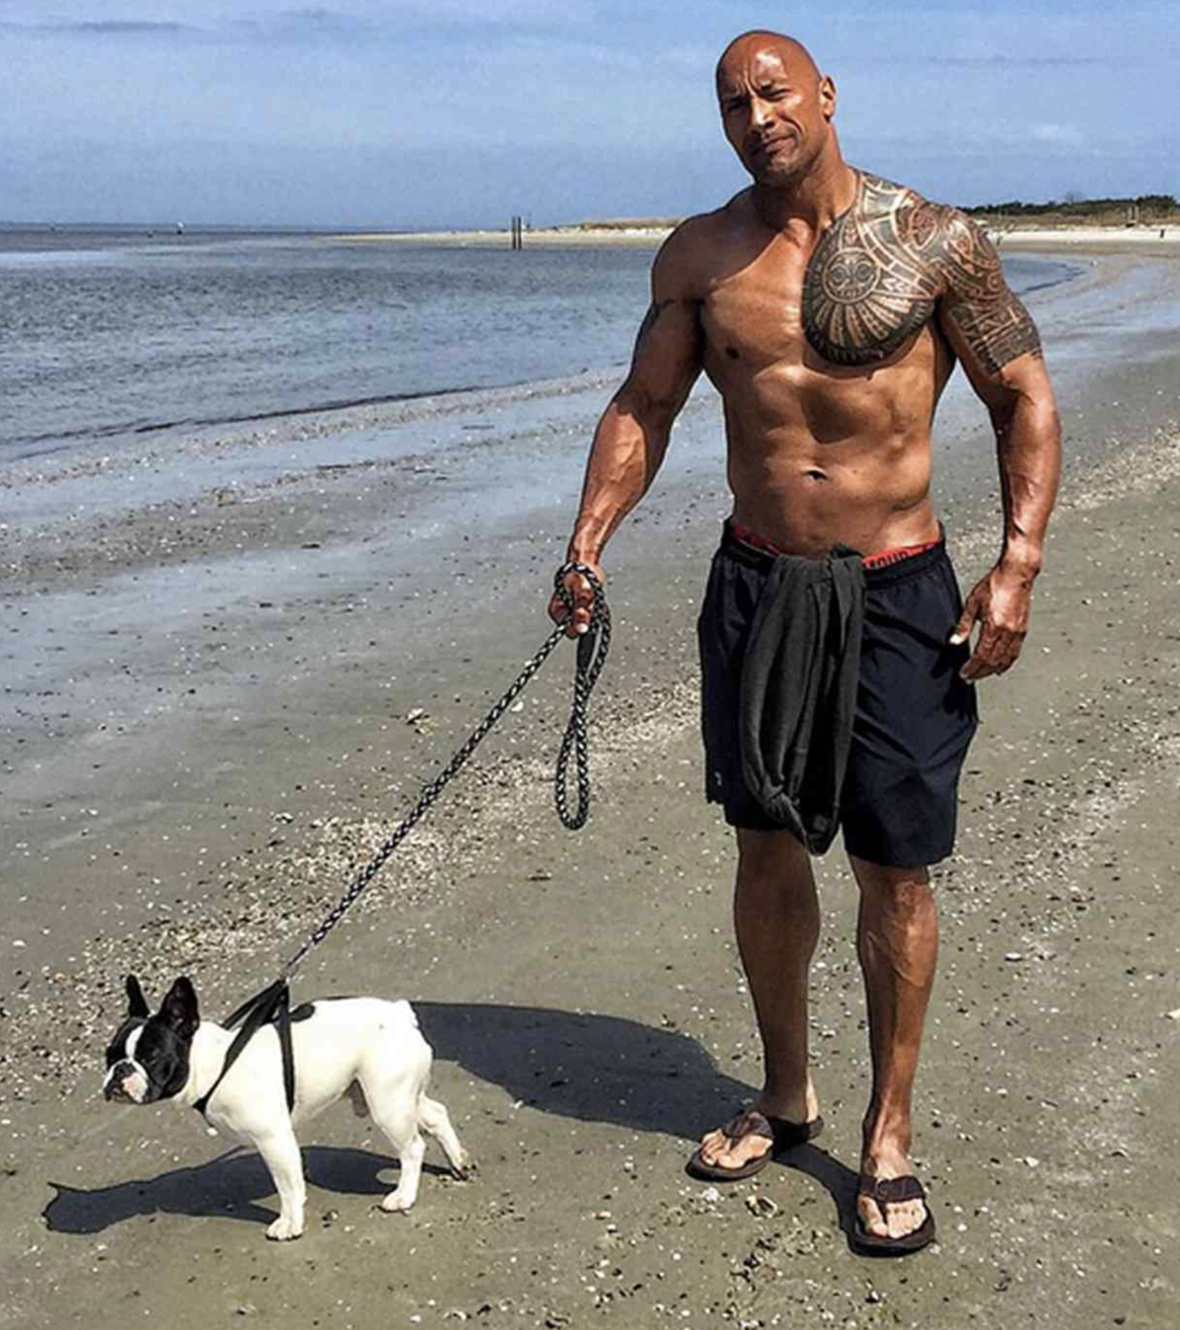 The Rock and his dog